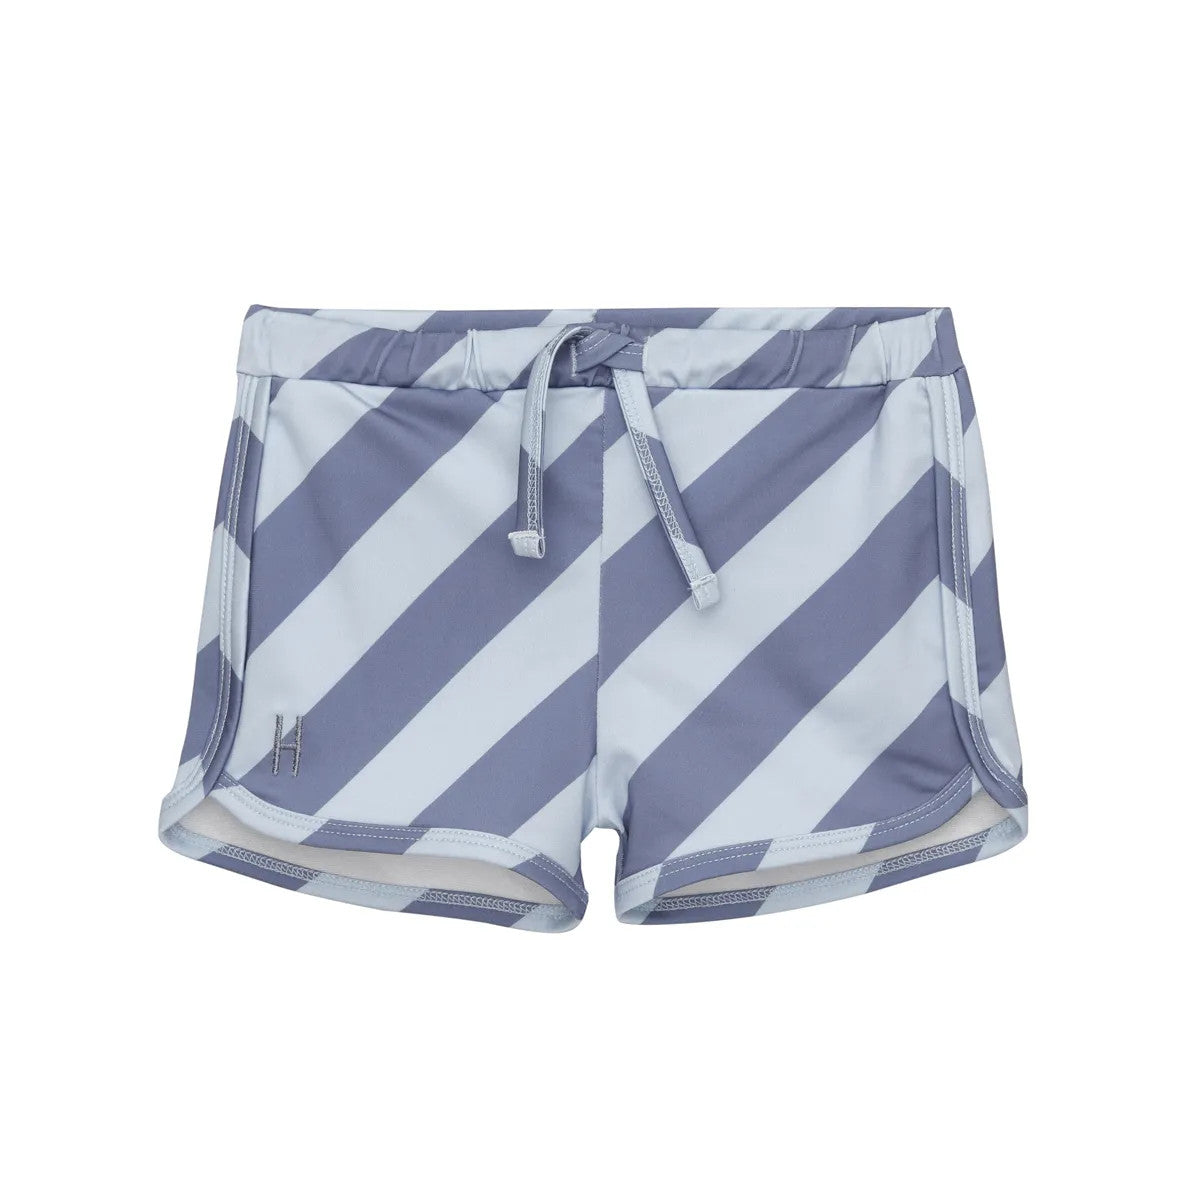 Little Hedonist unisex swim shorts made of recycled polyamide, with diagonal blue stripes